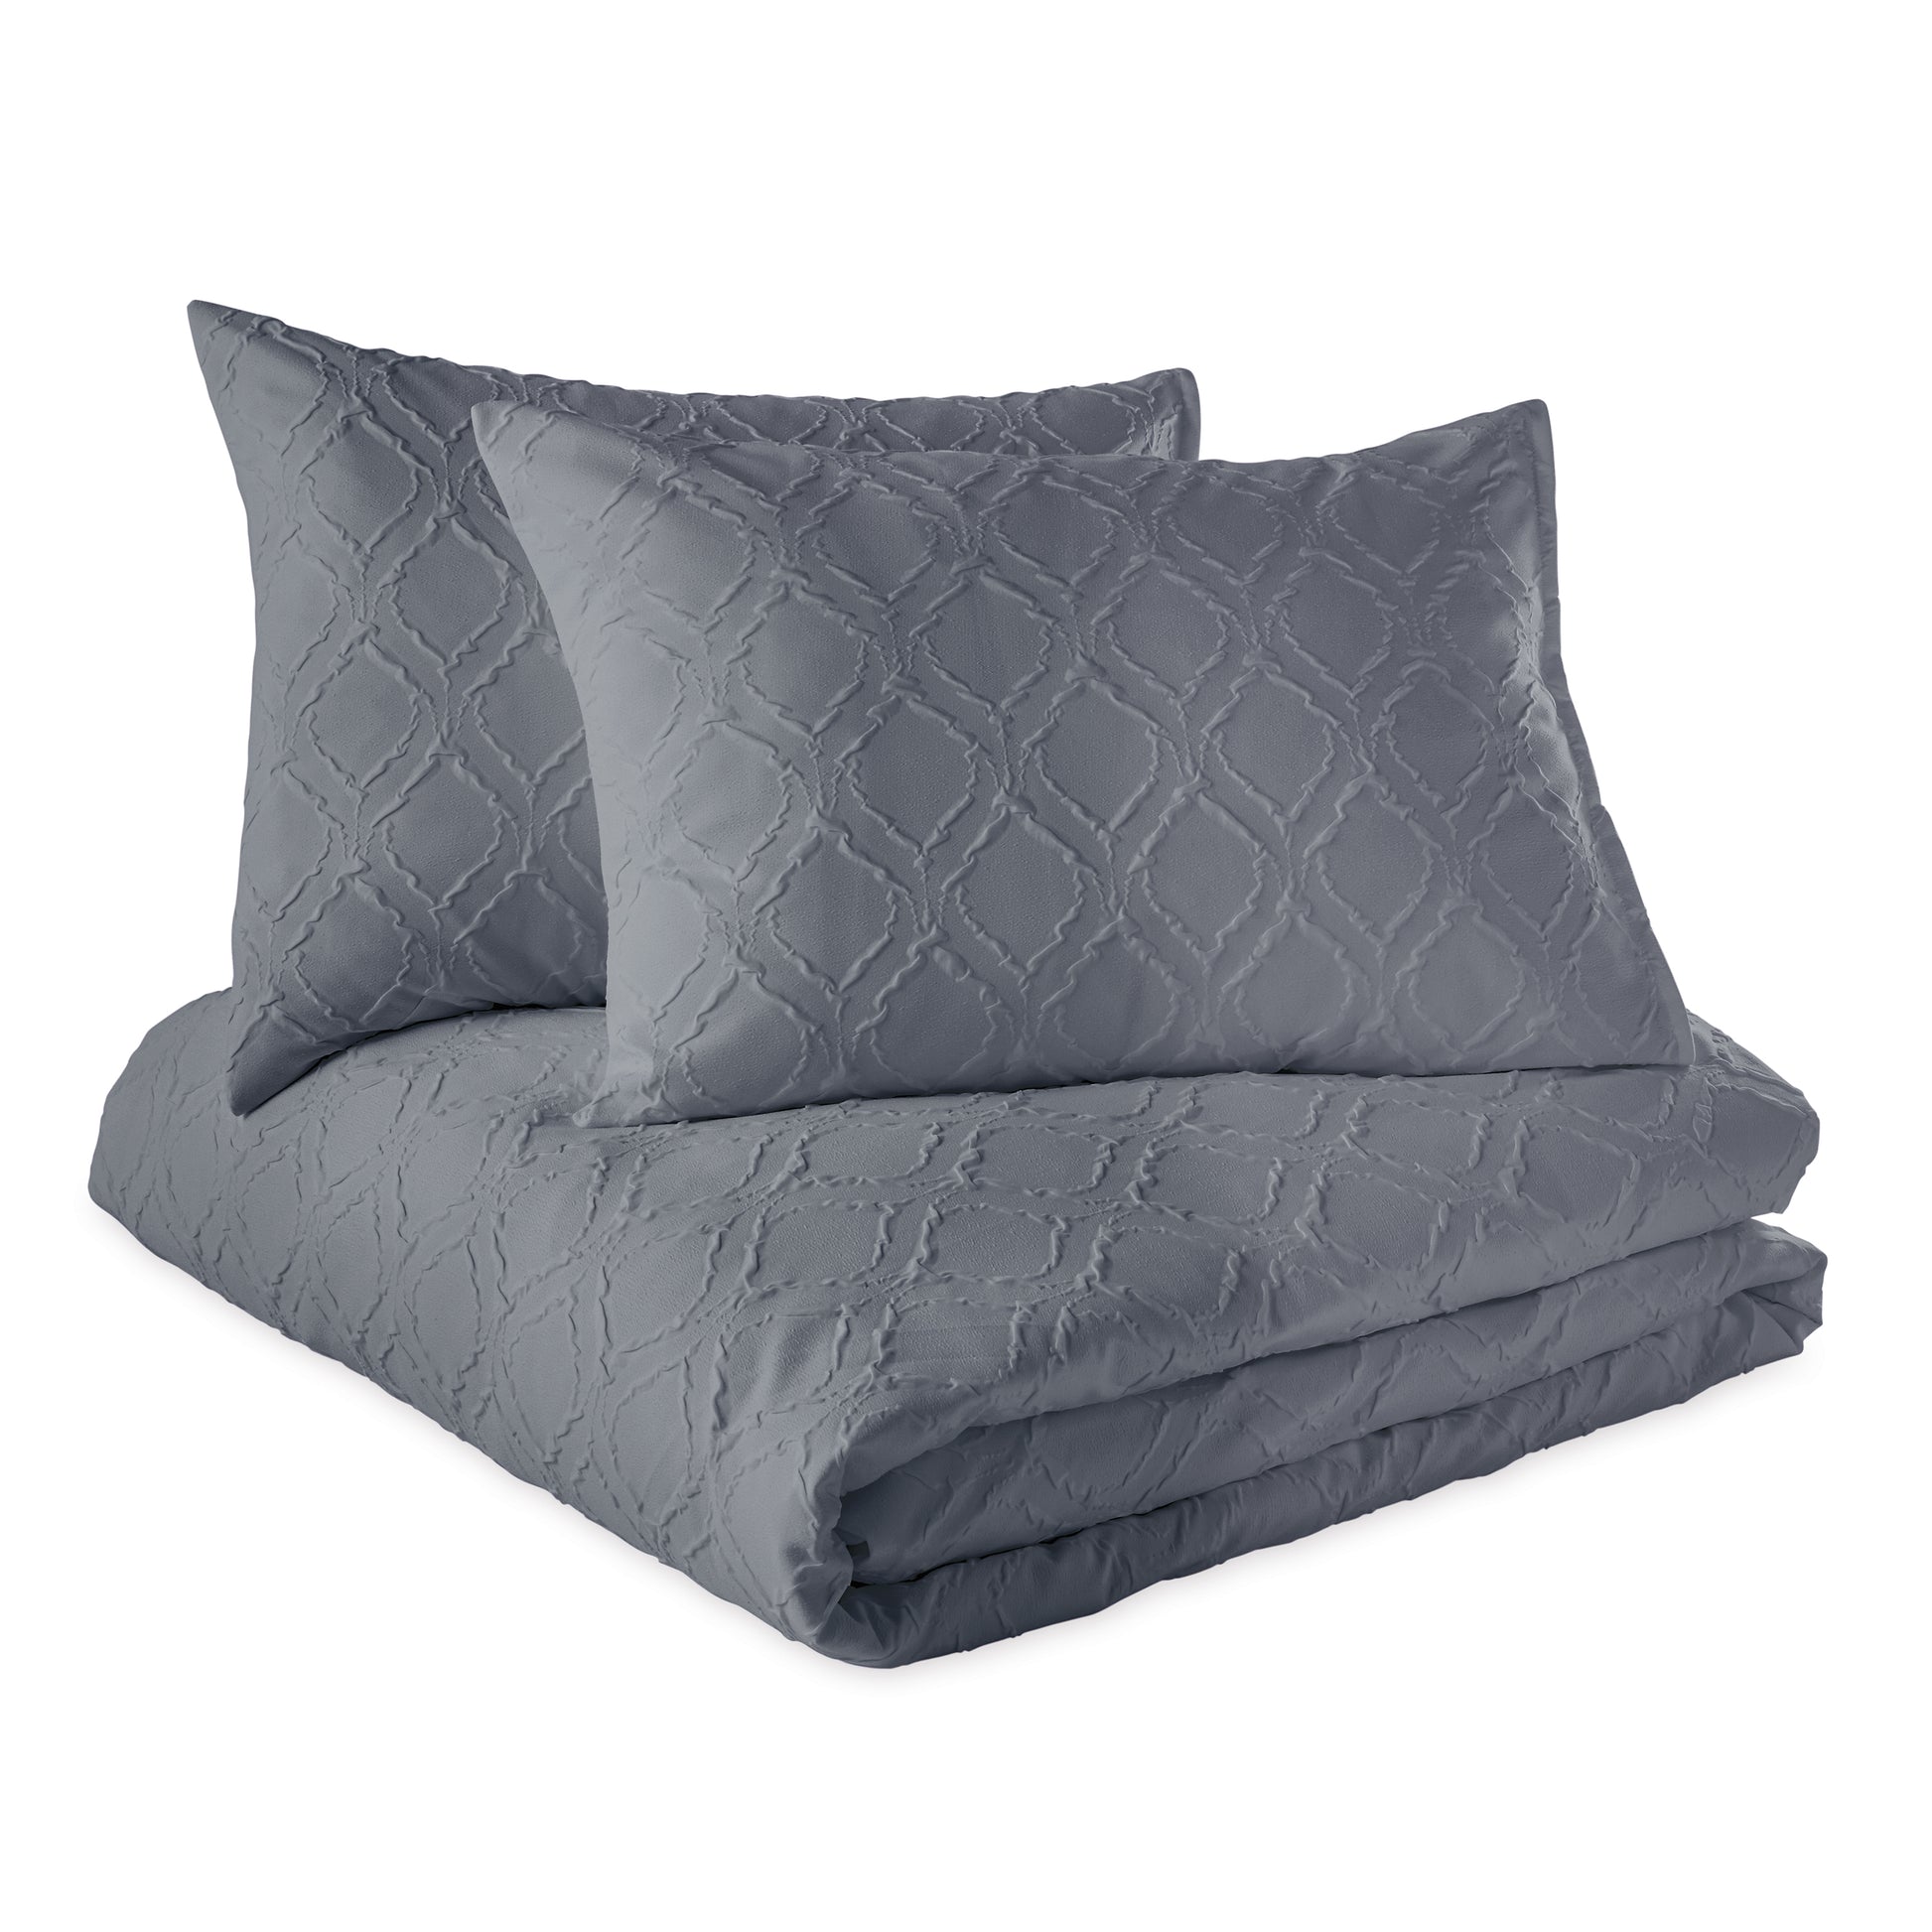 Microsculpt Solid Ogee Comforter Set charcoal